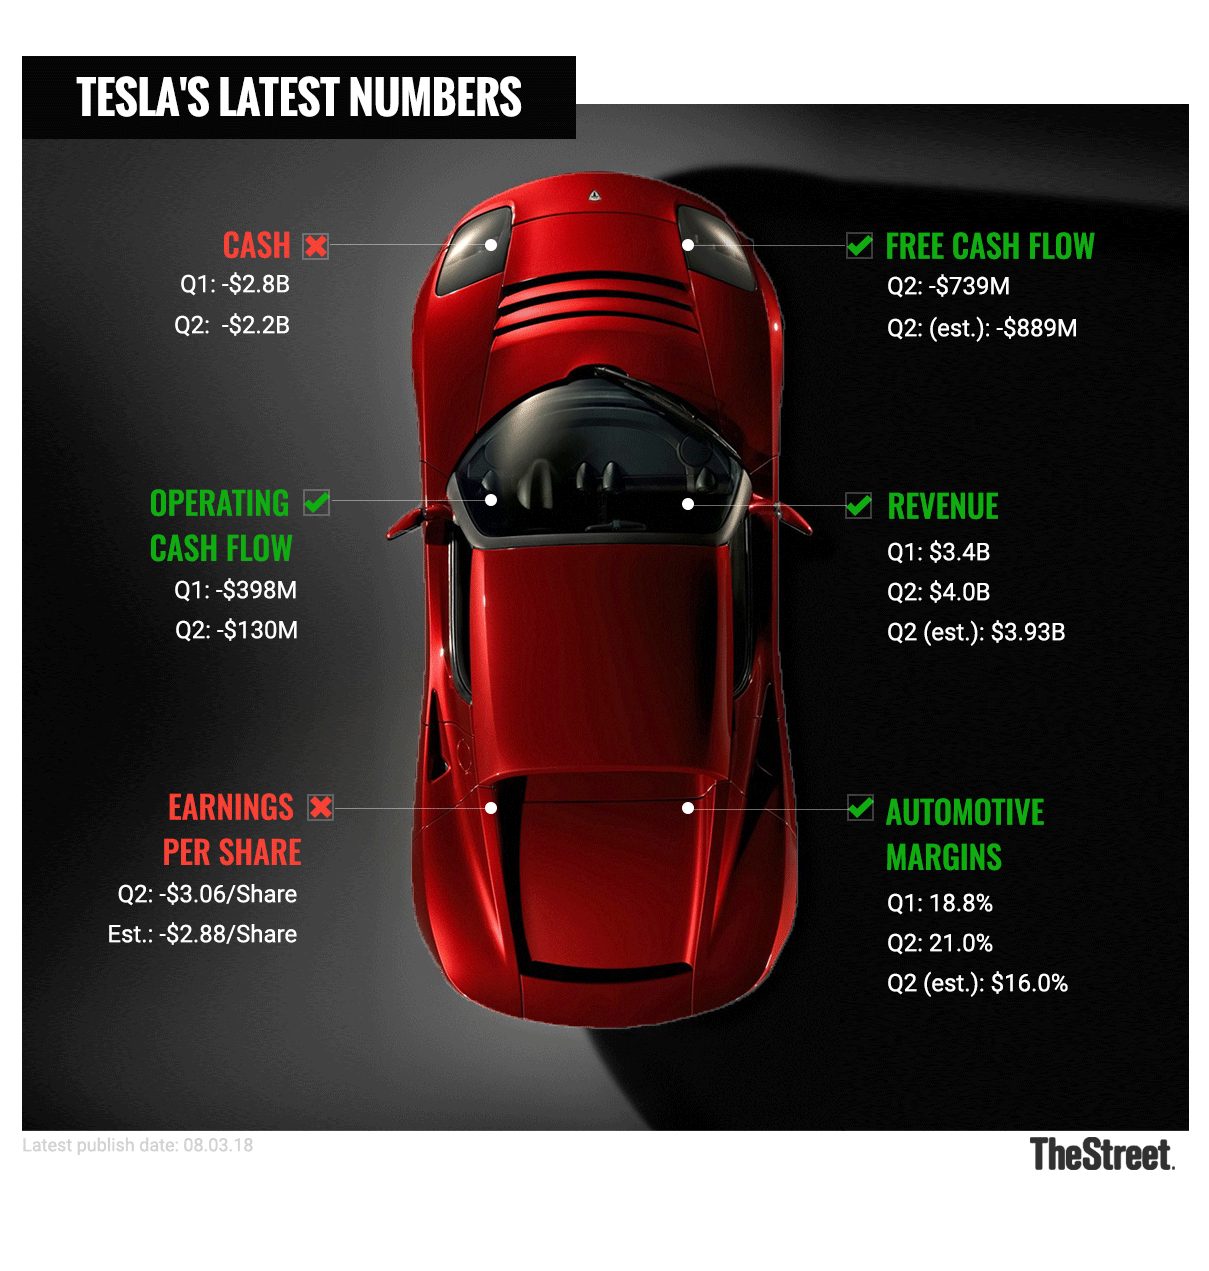 The Most Amazing Thing About Tesla - TheStreet